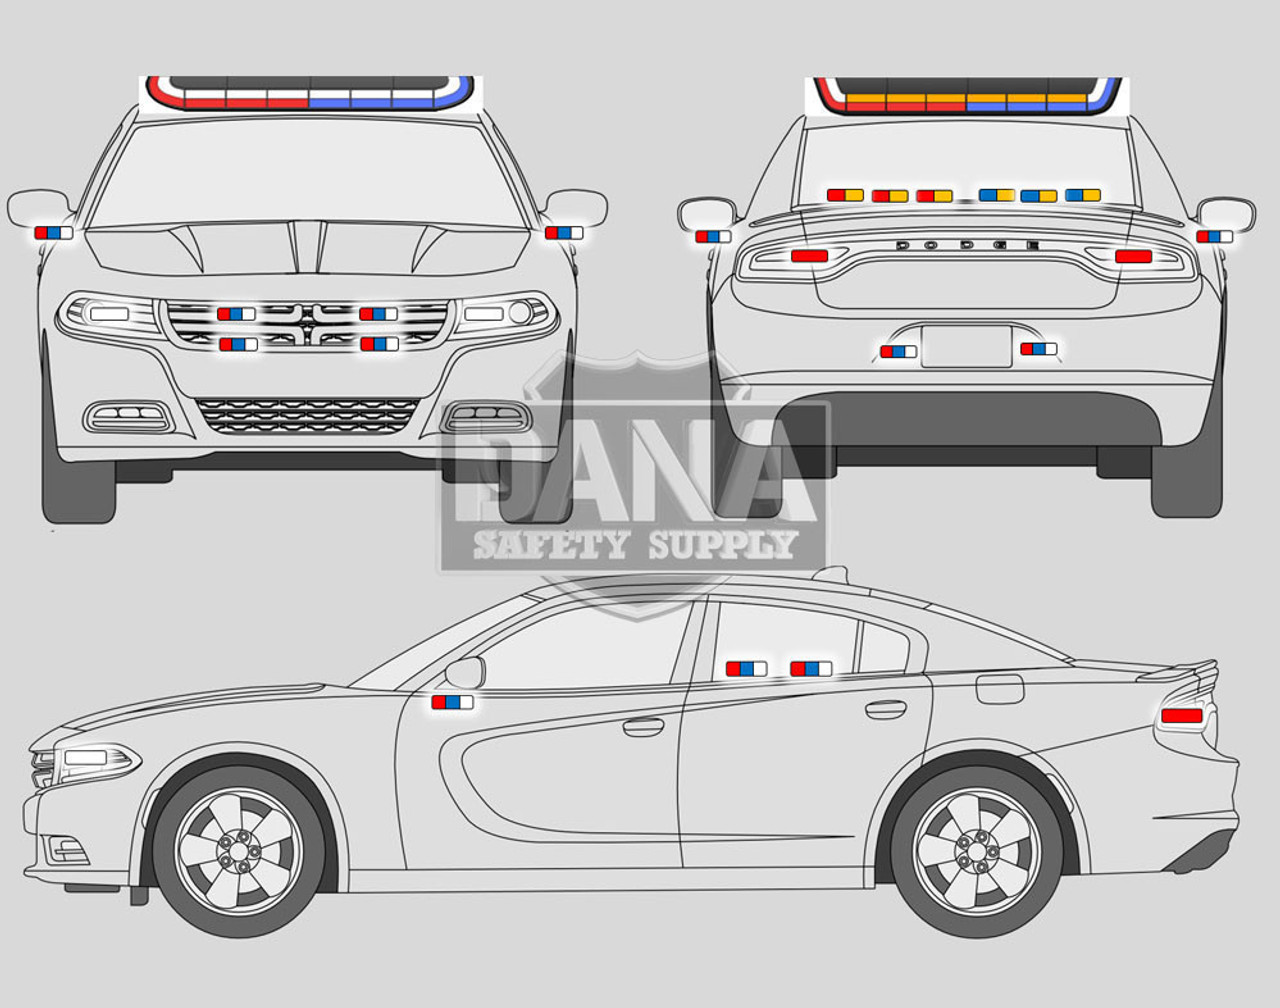 New 2023 Silver Dodge Charger PPV V8 RWD ready to be built as a Marked Patrol Package Police Pursuit Car (Emergency Lighting, Siren, Controller, Partition, Window Bars, etc.), + Delivery, S6